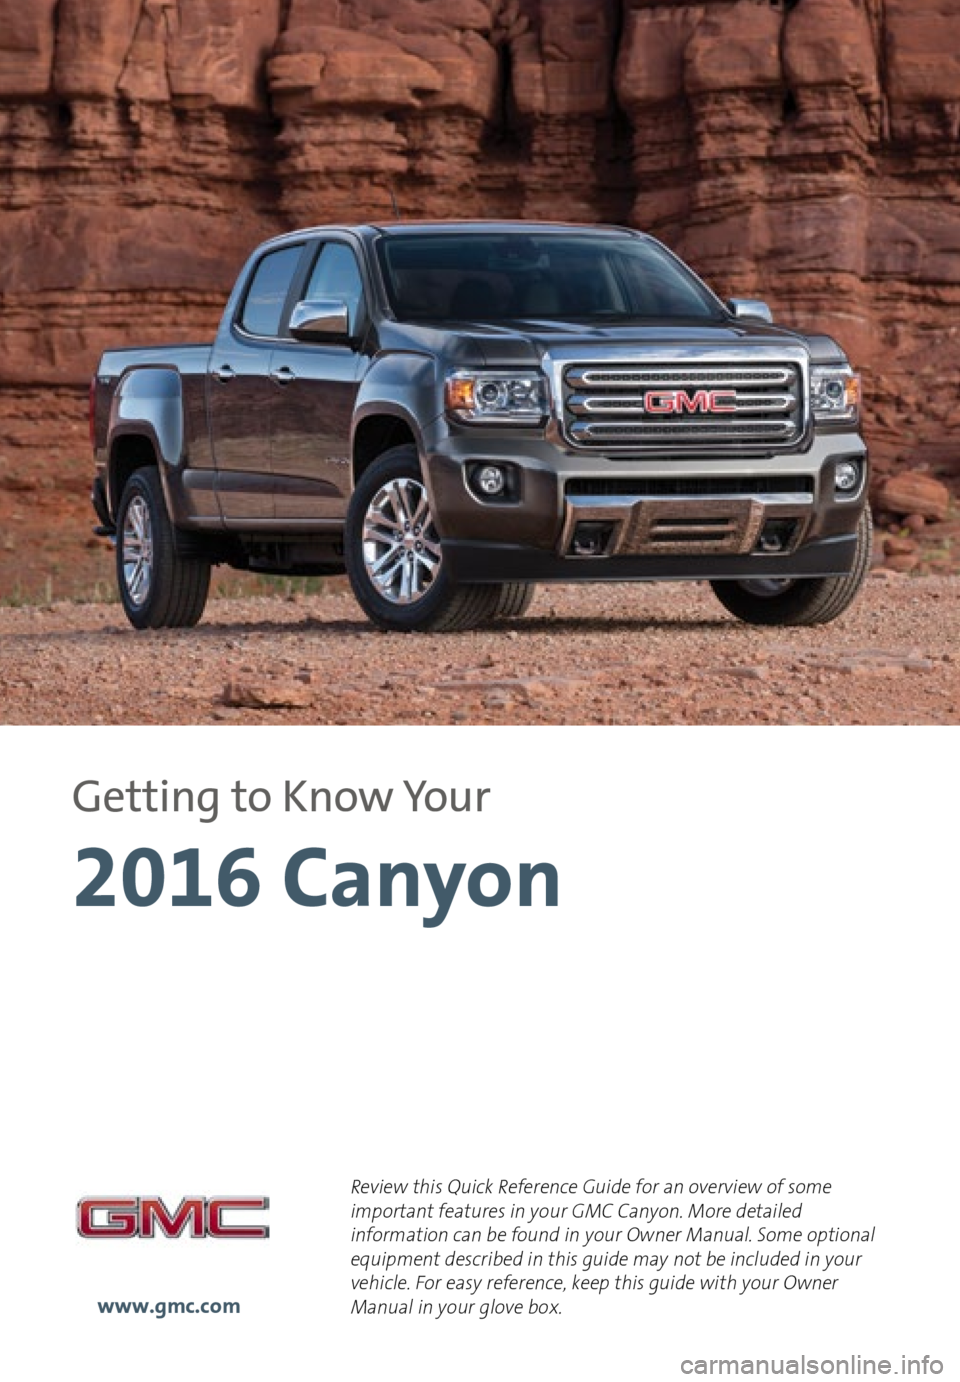 GMC CANYON 2016  Get To Know Guide 1
Review this Quick Reference Guide for an overview of some 
important features in your GMC Canyon. More detailed 
information can be found in your Owner Manual. Some optional 
equipment described in 